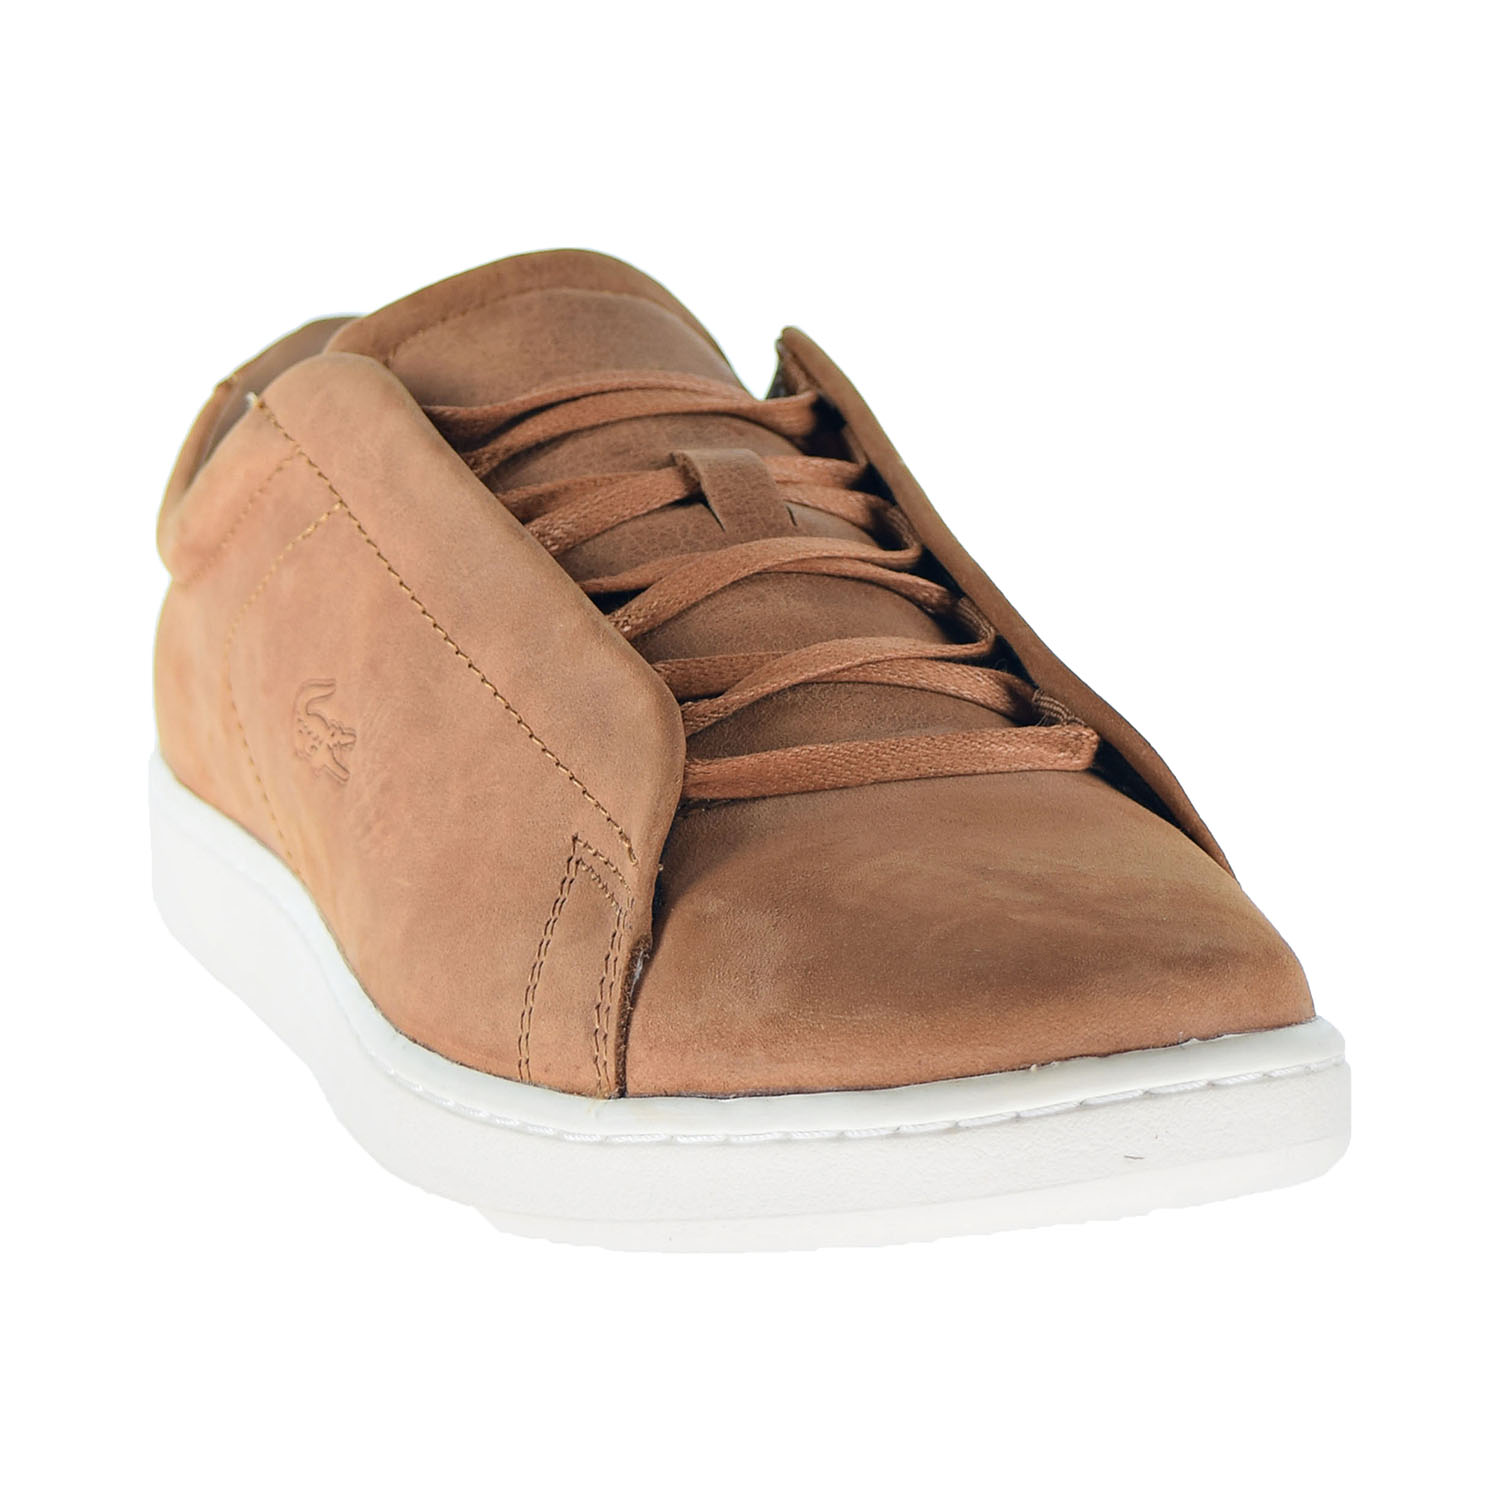 Lacoste Carnaby Evo Easy 319 1 SMA Men's Shoes Brown/Off White 7-38sma0015-2c3 - image 2 of 6